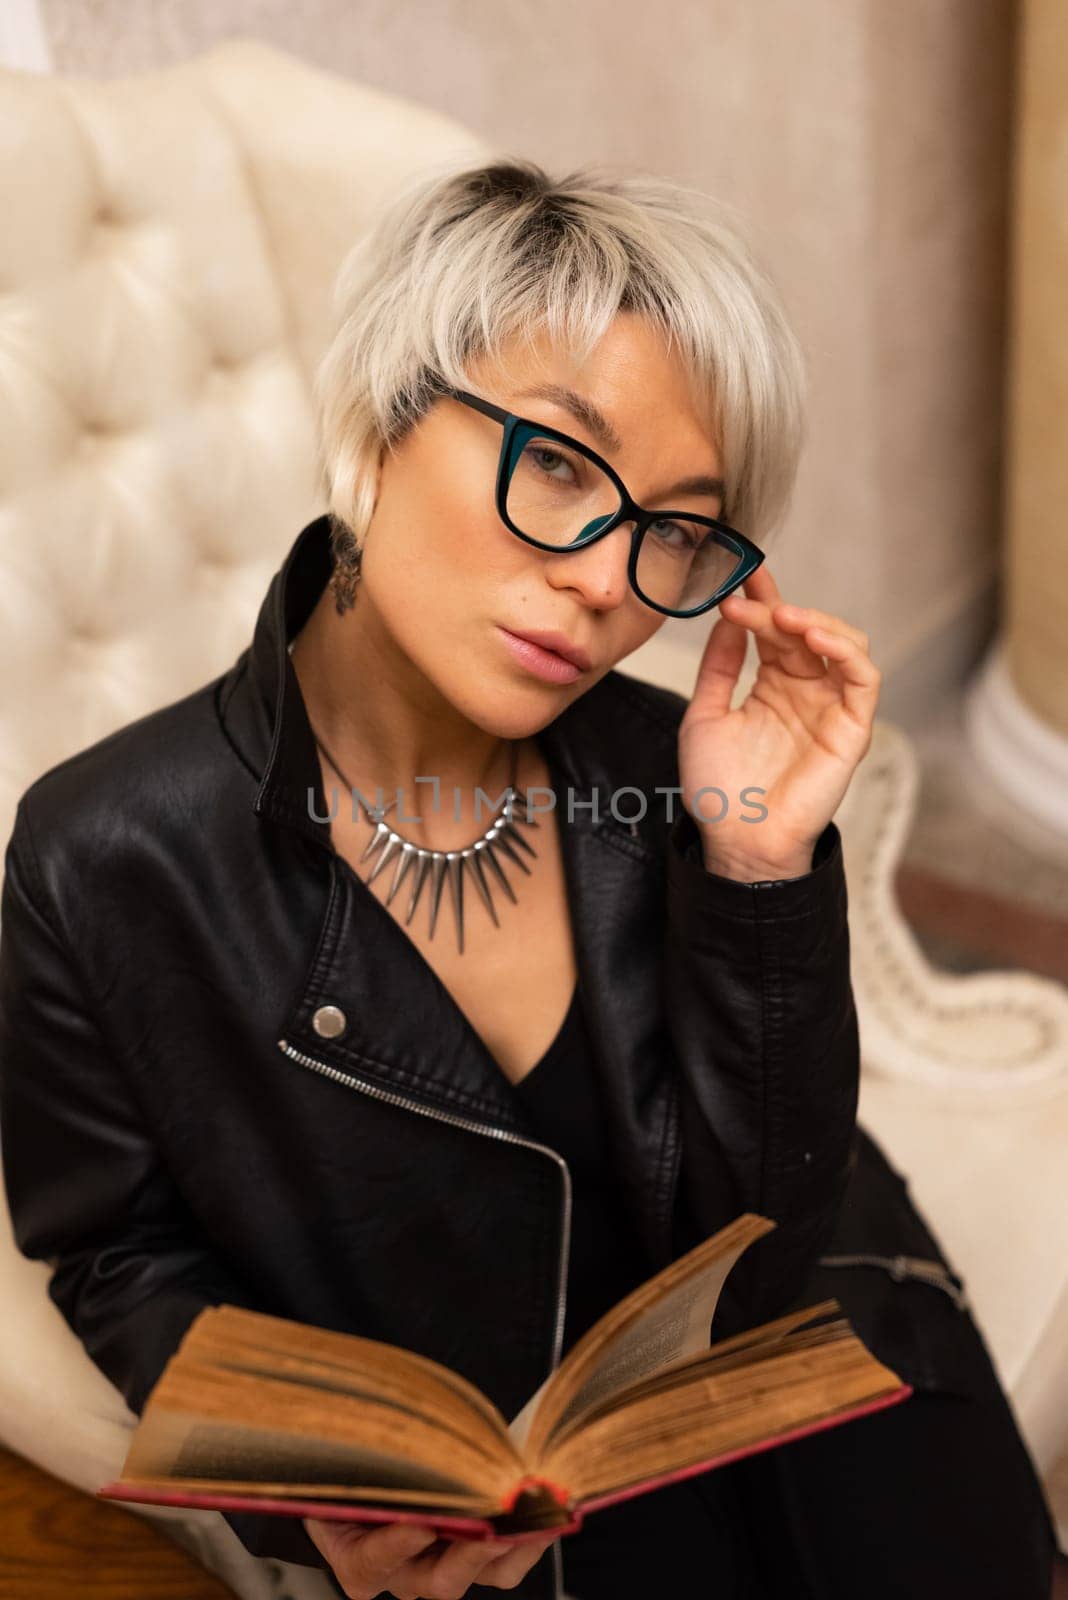 Portrait of an adult beautiful girl with glasses and short hair, holding a book in her hand in a room by Rotozey